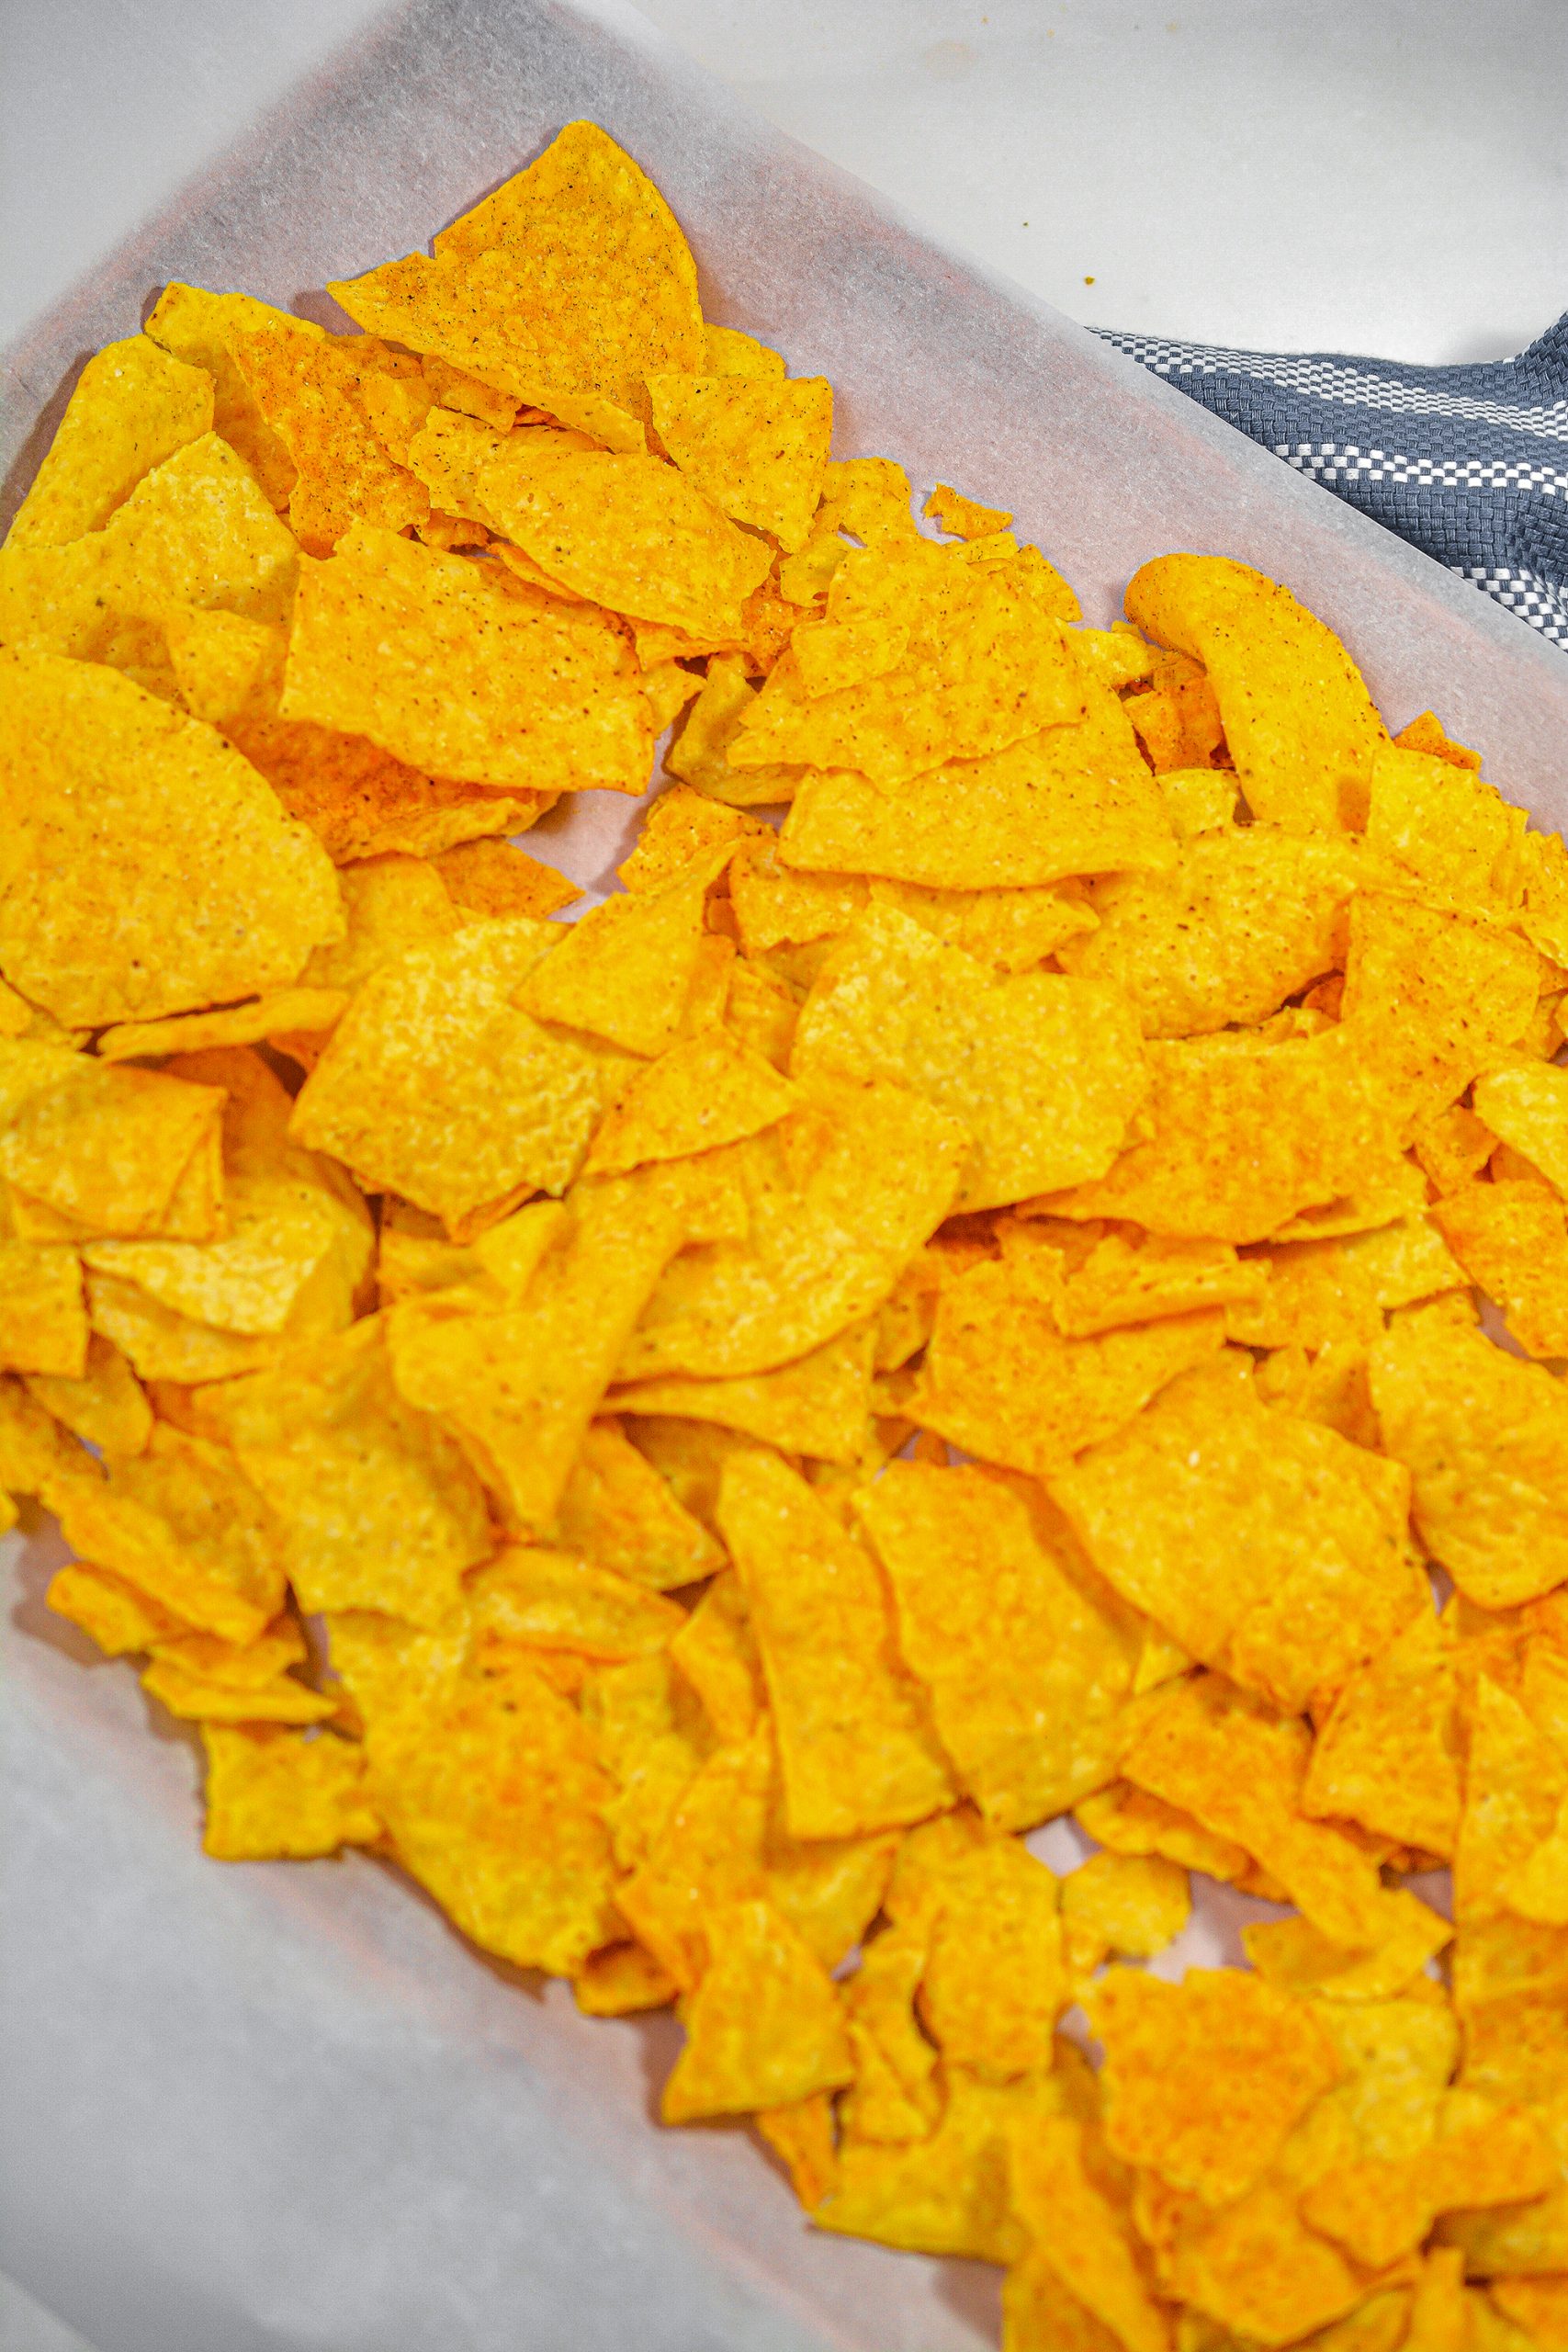 Place one bag of tortilla chips on each of two different baking sheets. 